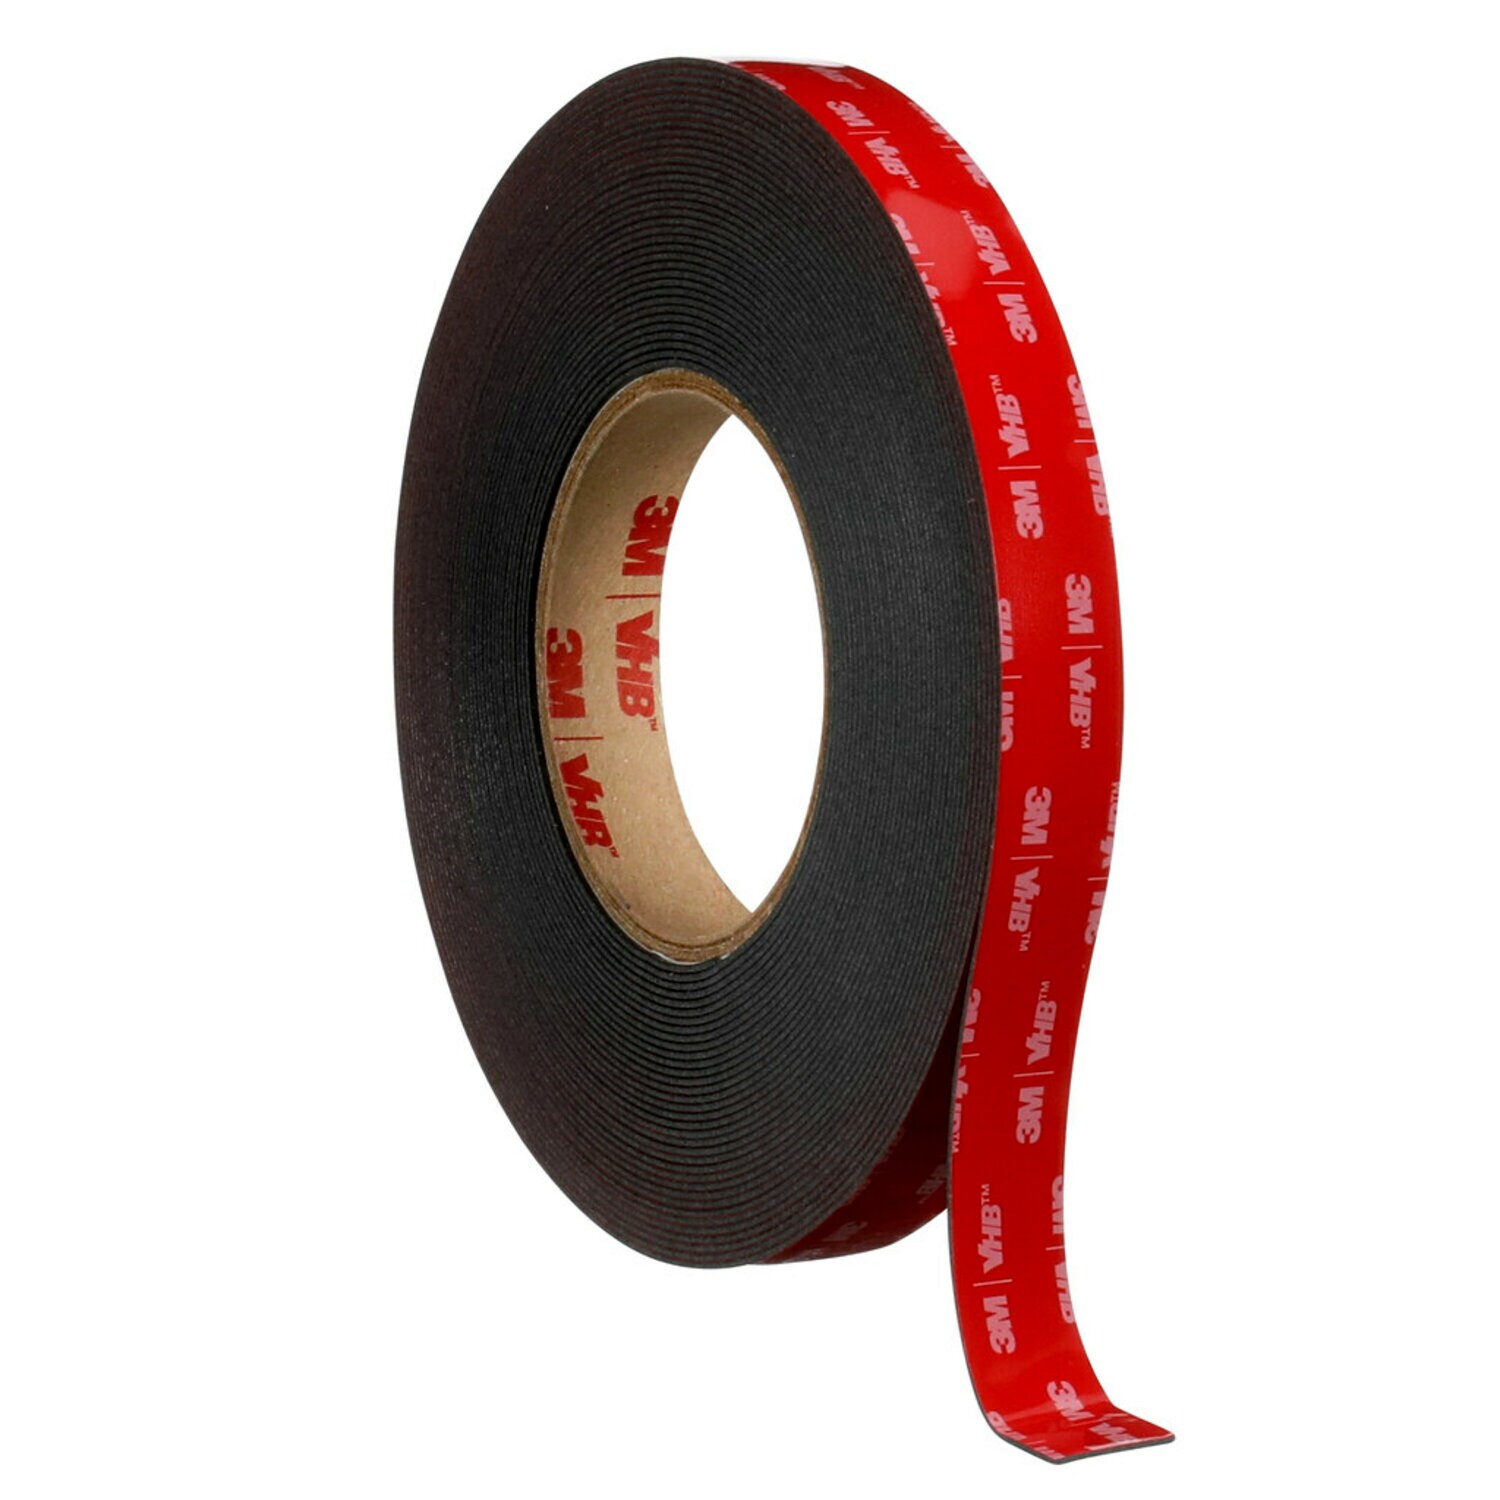 3M Vhb 4646 Heavy Duty Mounting Tape - 3 In. X 15 Ft. Permanent